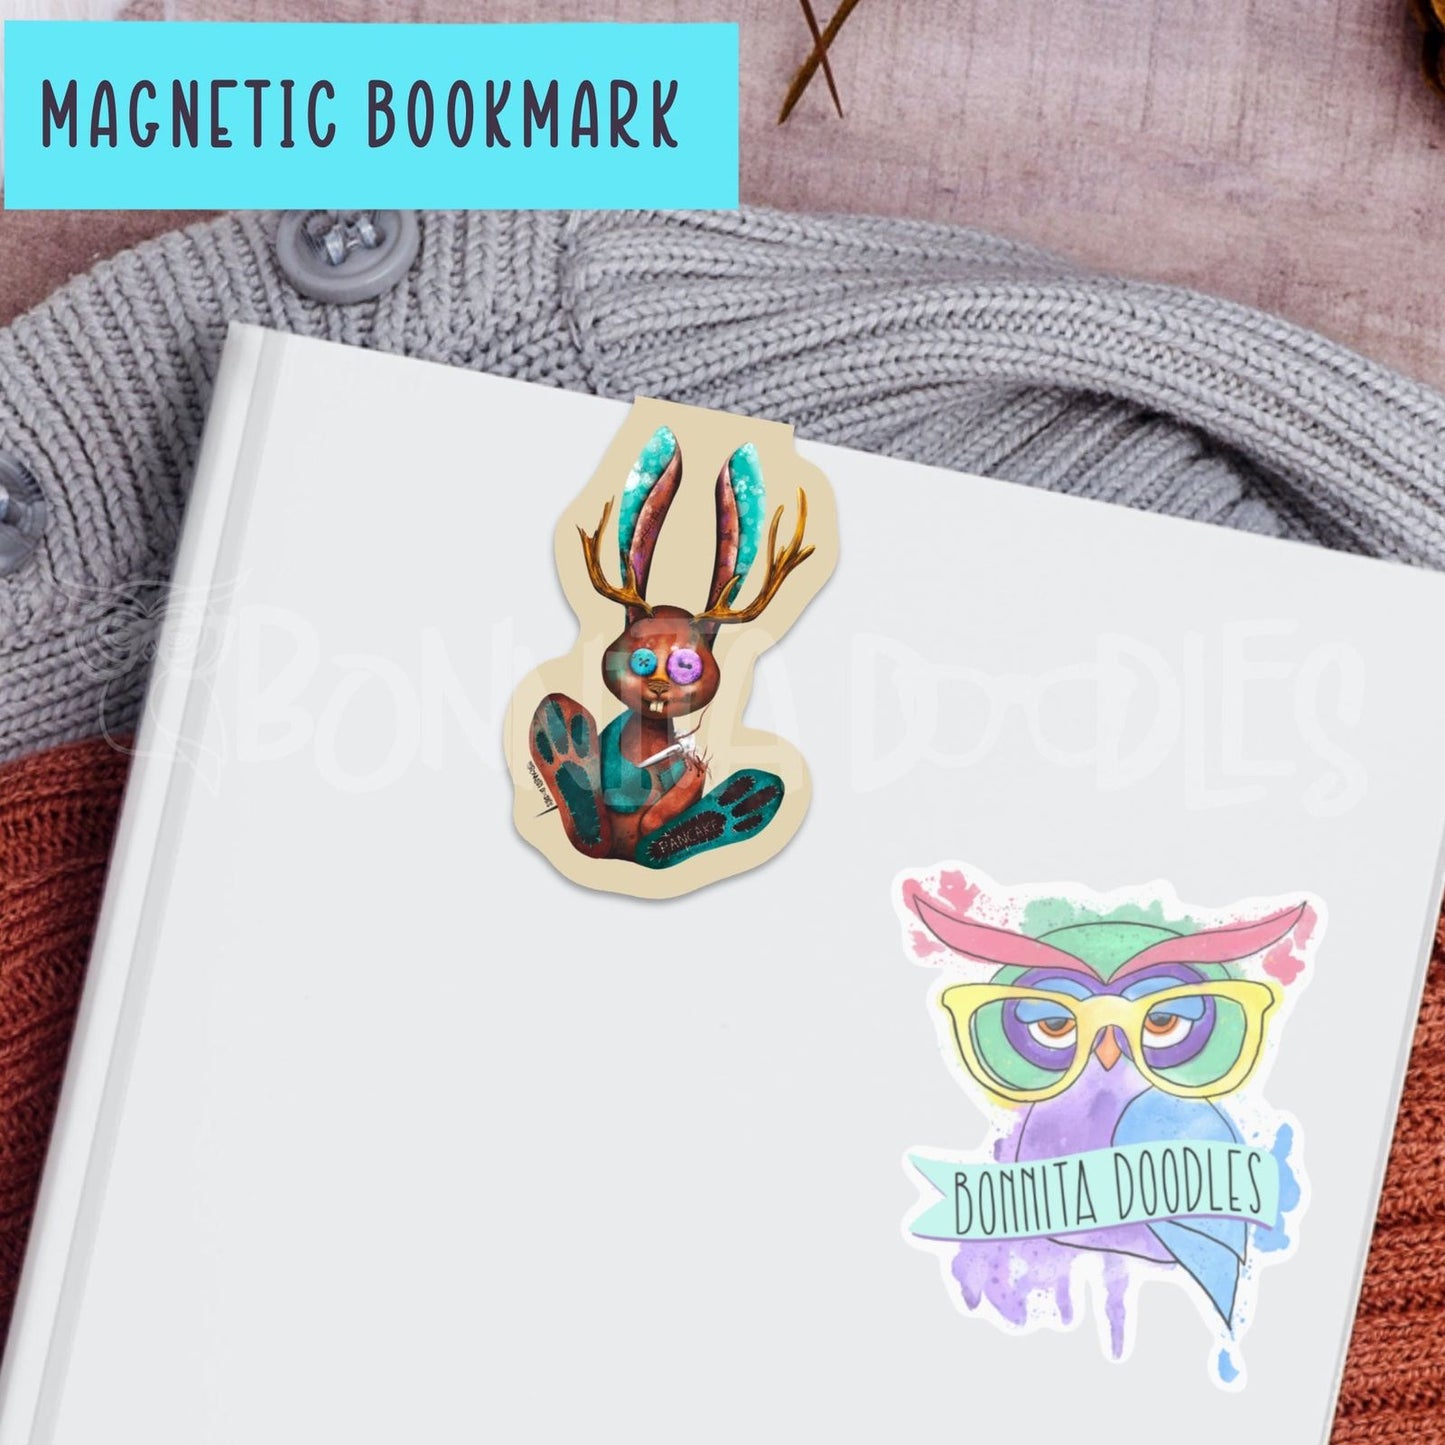 Pancake the rabbit voodoo doll. magnetic bookmark - the perfect gift